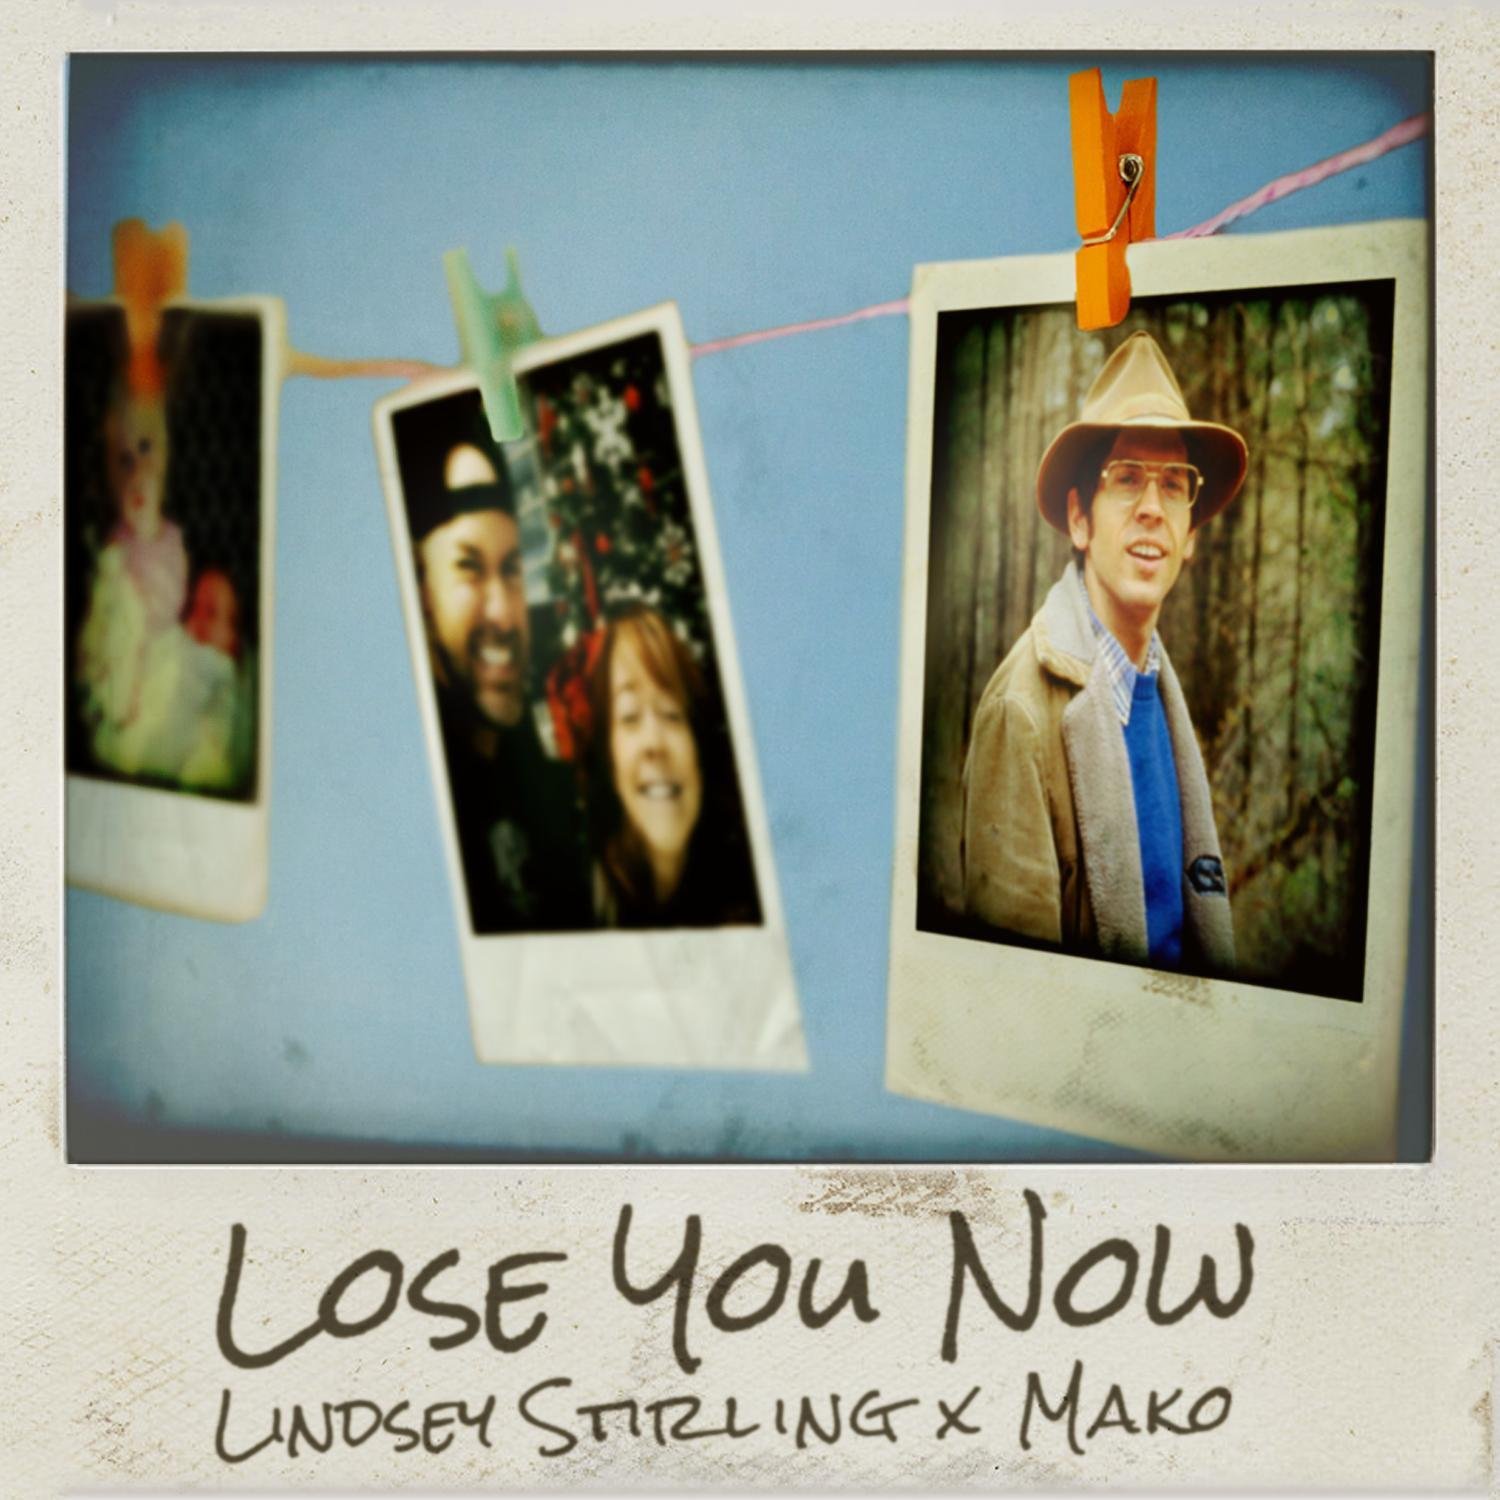 Lindsey Stirling/Mako《Lose You Now》[FLAC/MP3-320K]